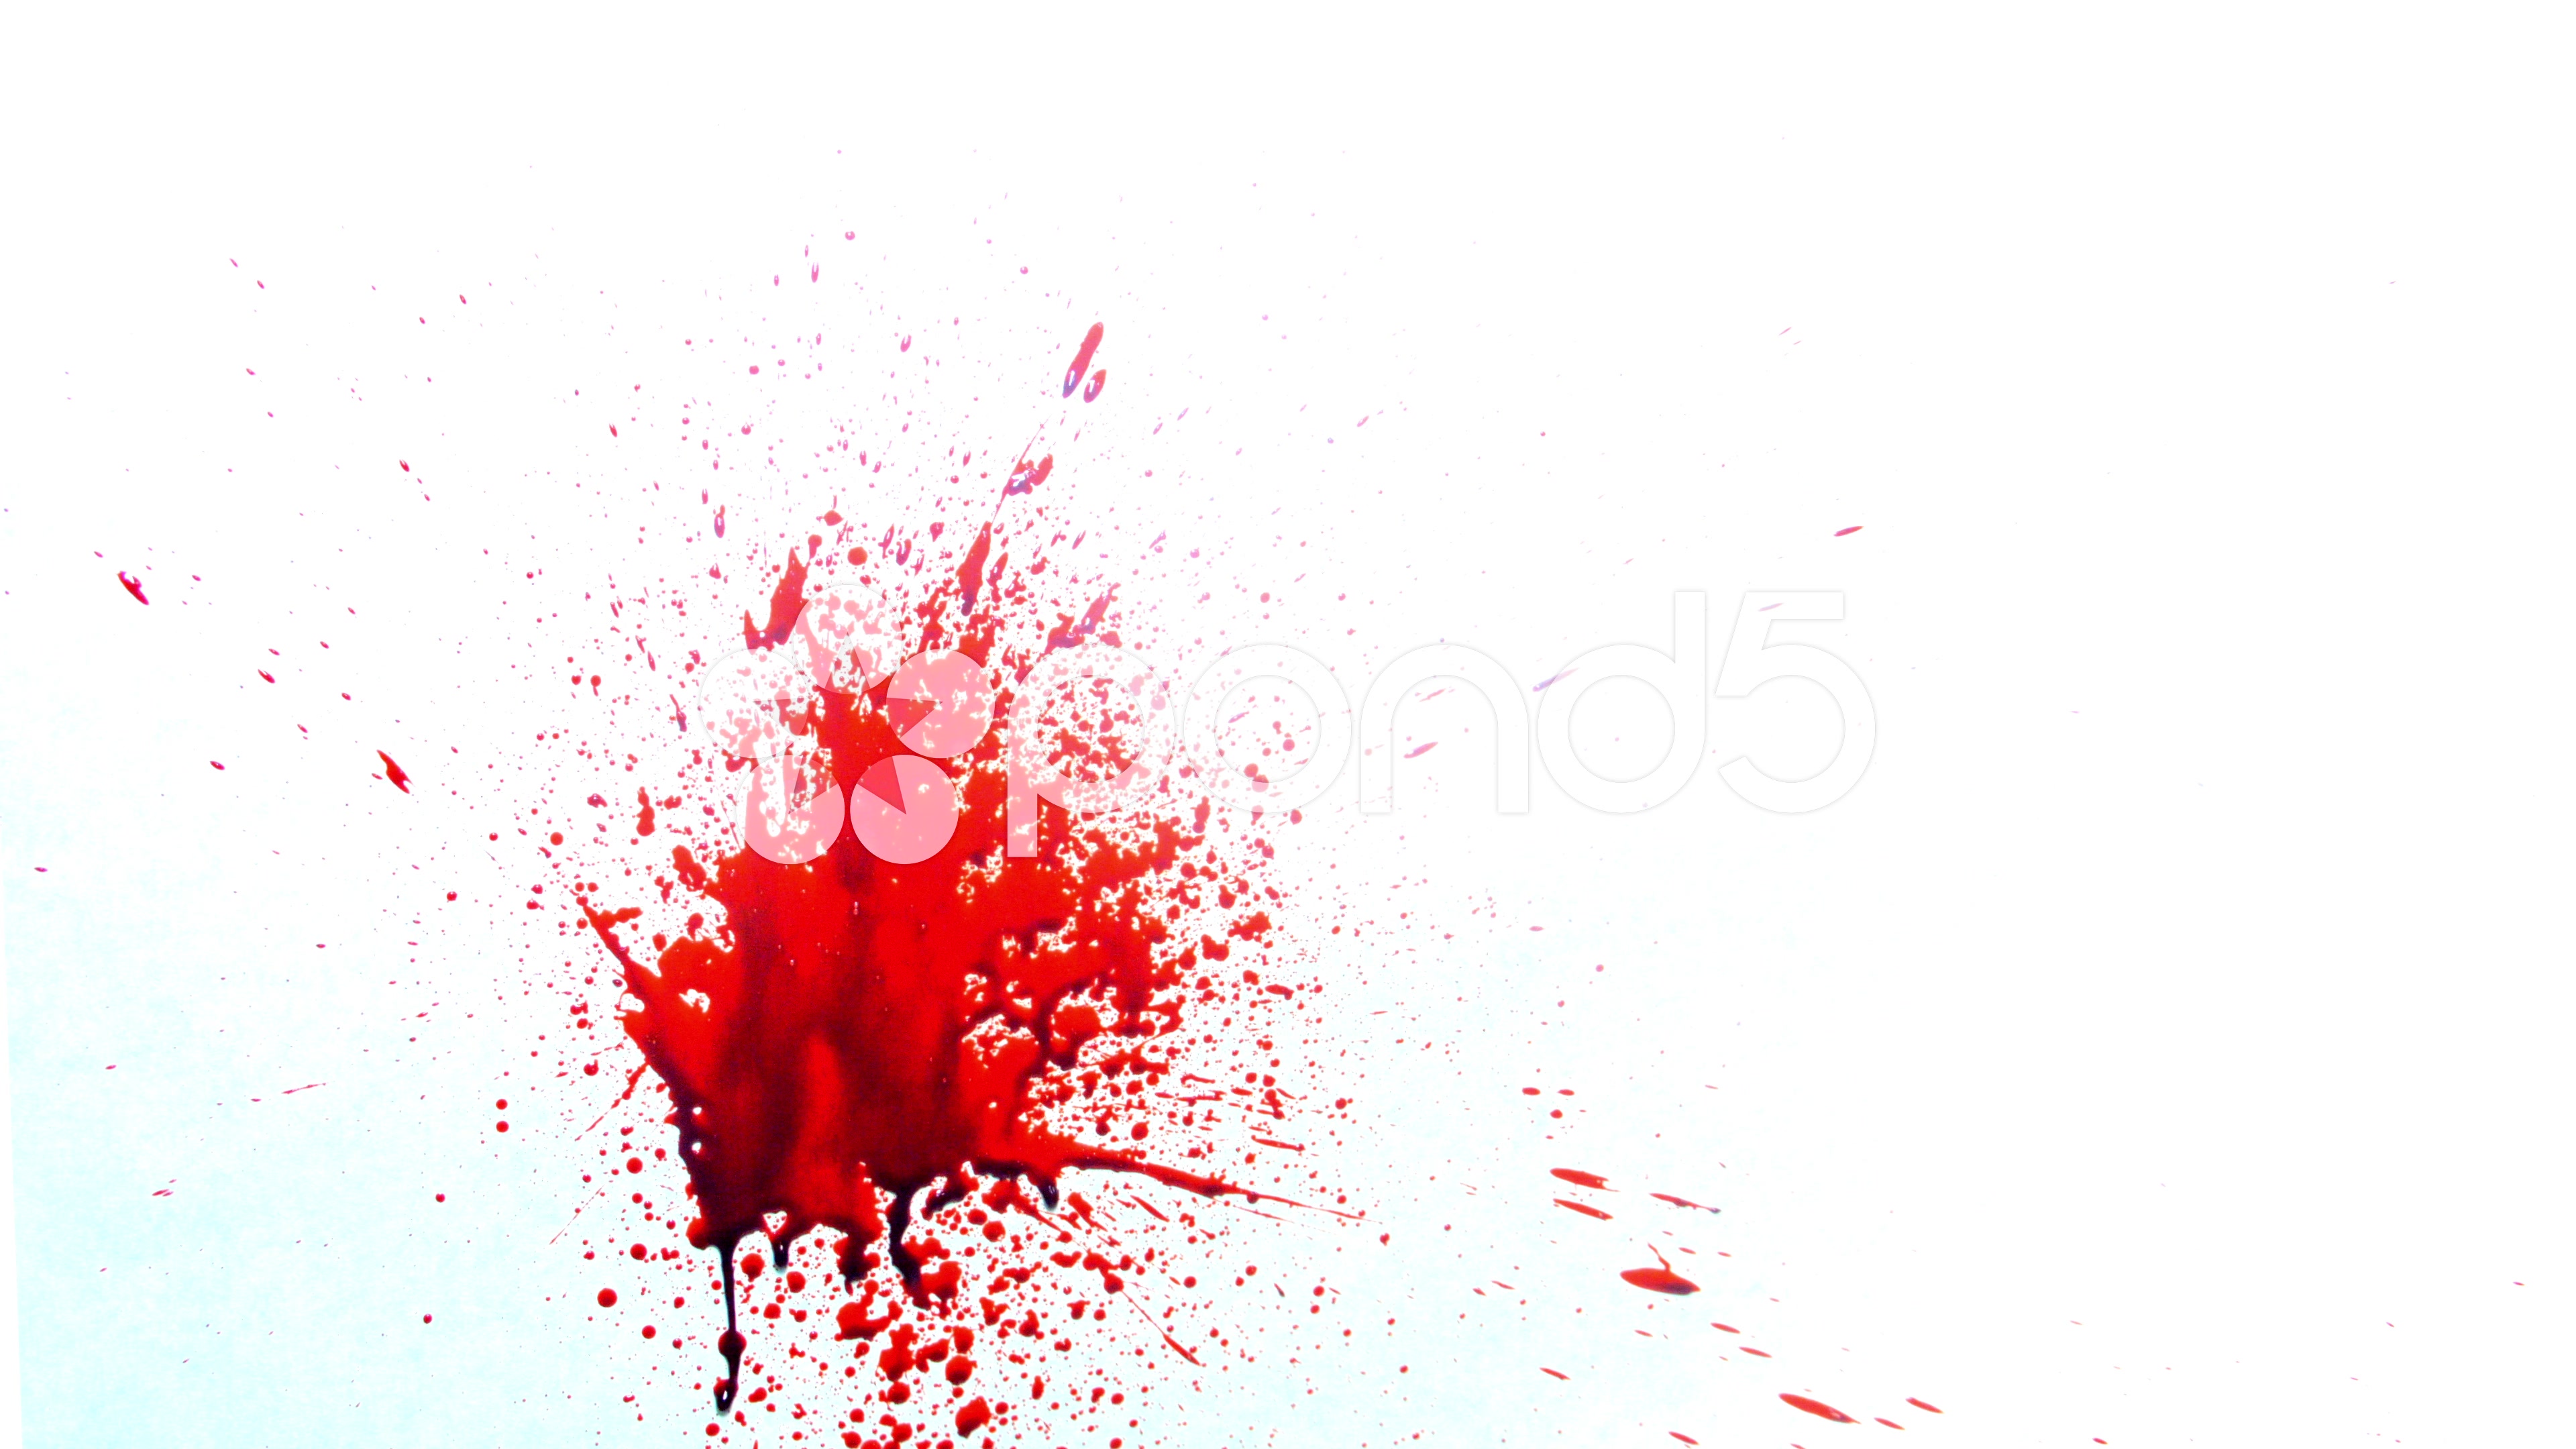 Blood Spatter Against A White Surface 4K Stock Video 42275815 | HD